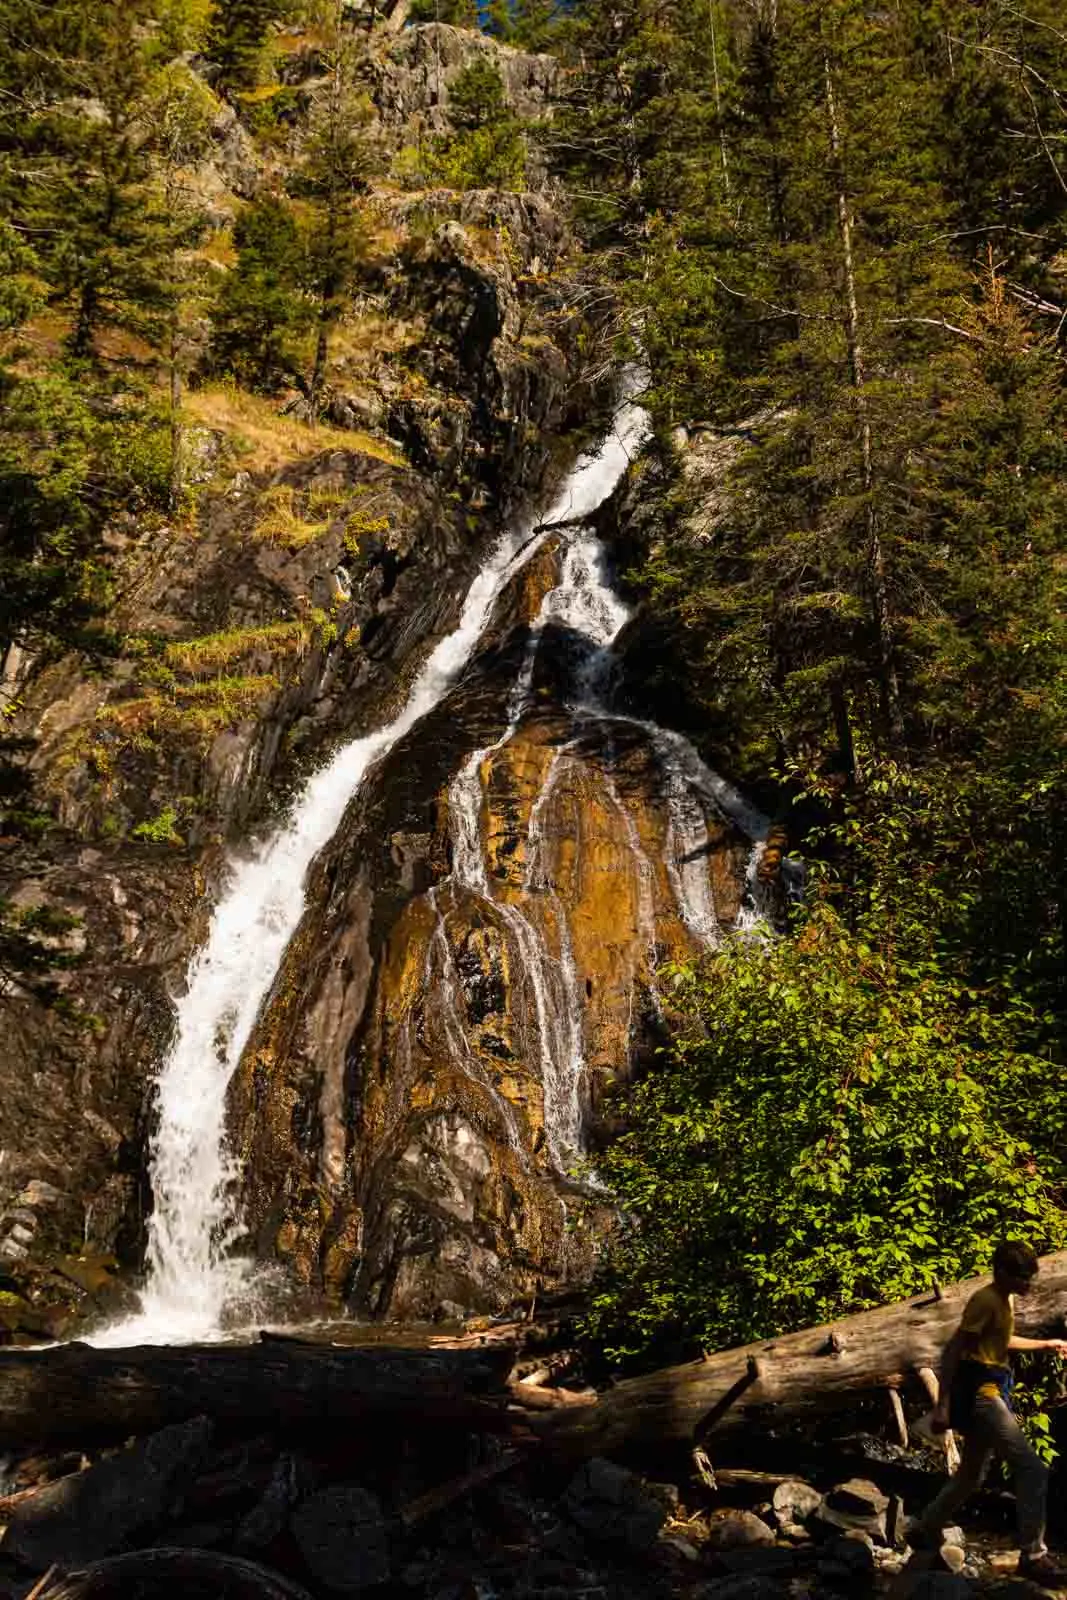 Don't forget Pine Creek Falls on your Montana road trip!